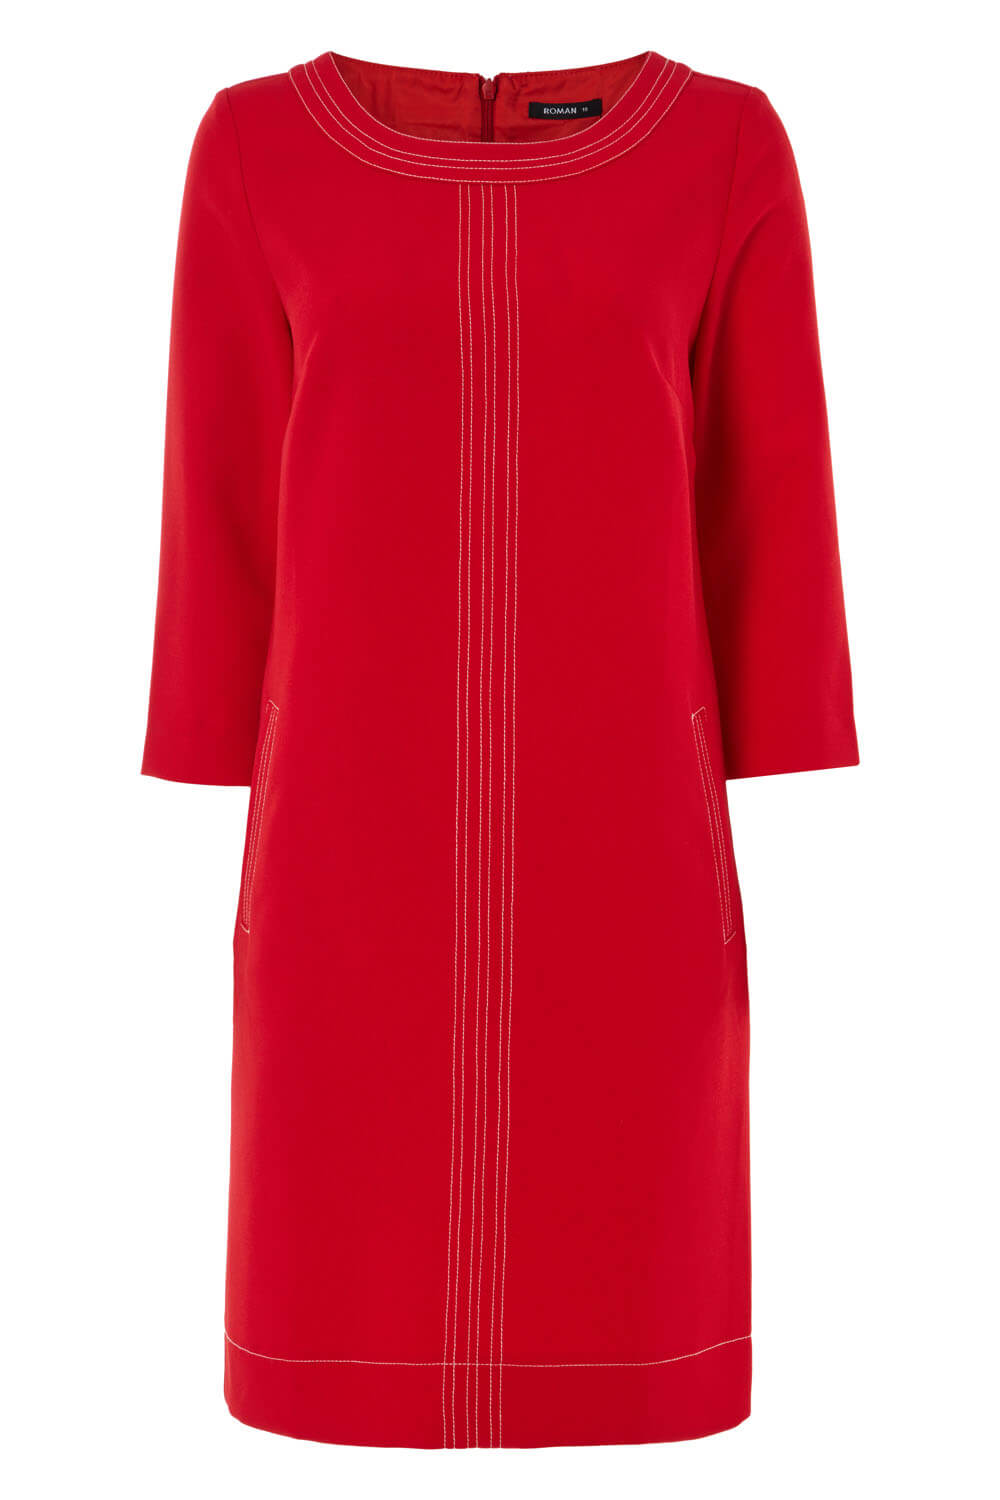 Red 3/4 Sleeve Top Stitch Shift Dress, Image 3 of 5